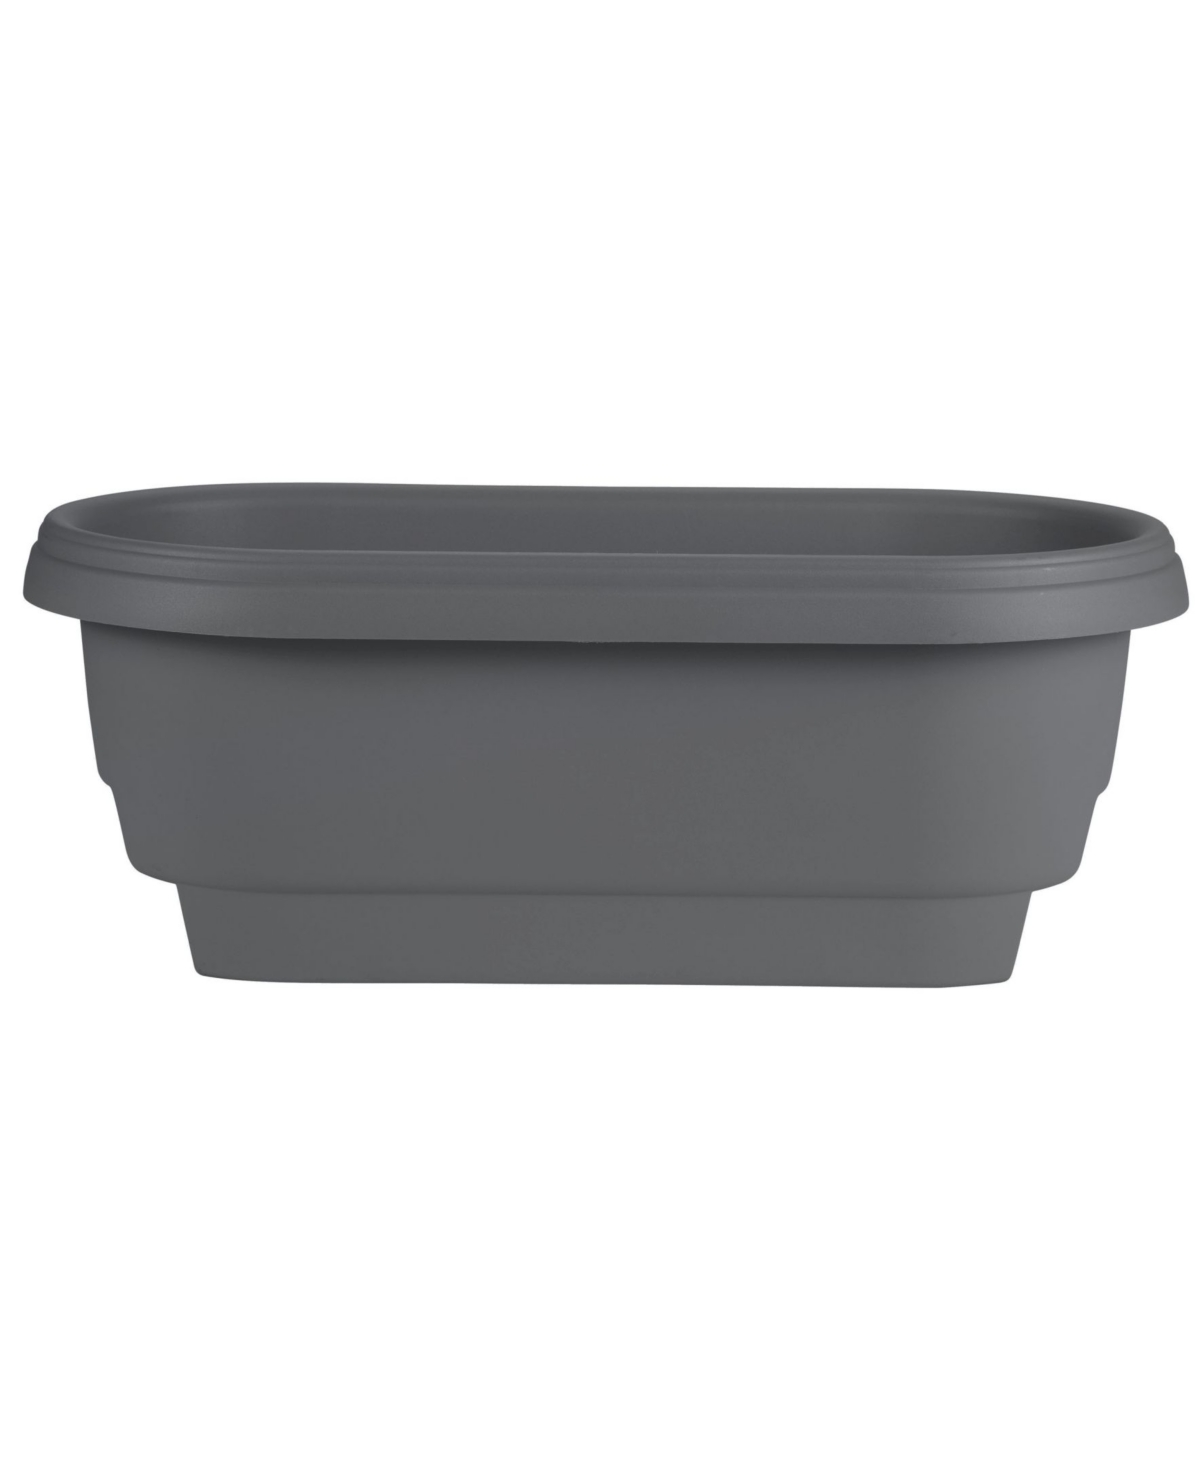 Classic Oval Deck Rail Planter, Charcoal -24 inches - Charcoal